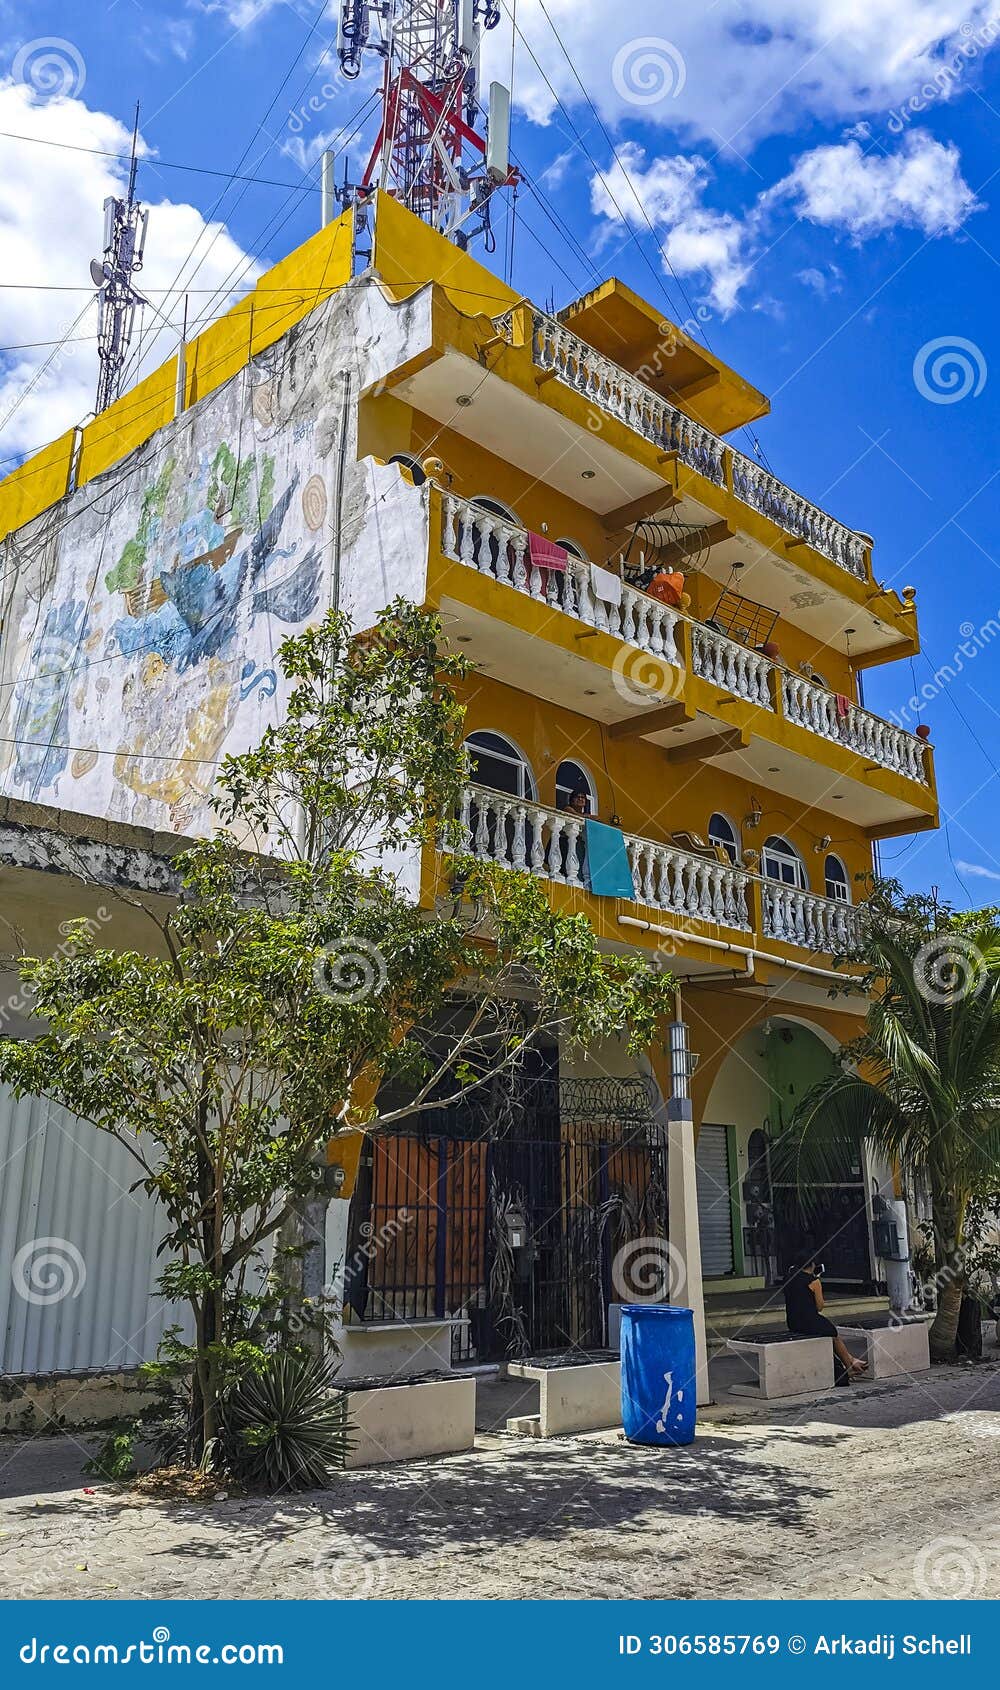 typical pedestrian street cityscape wall paintings playa del carmen mexico